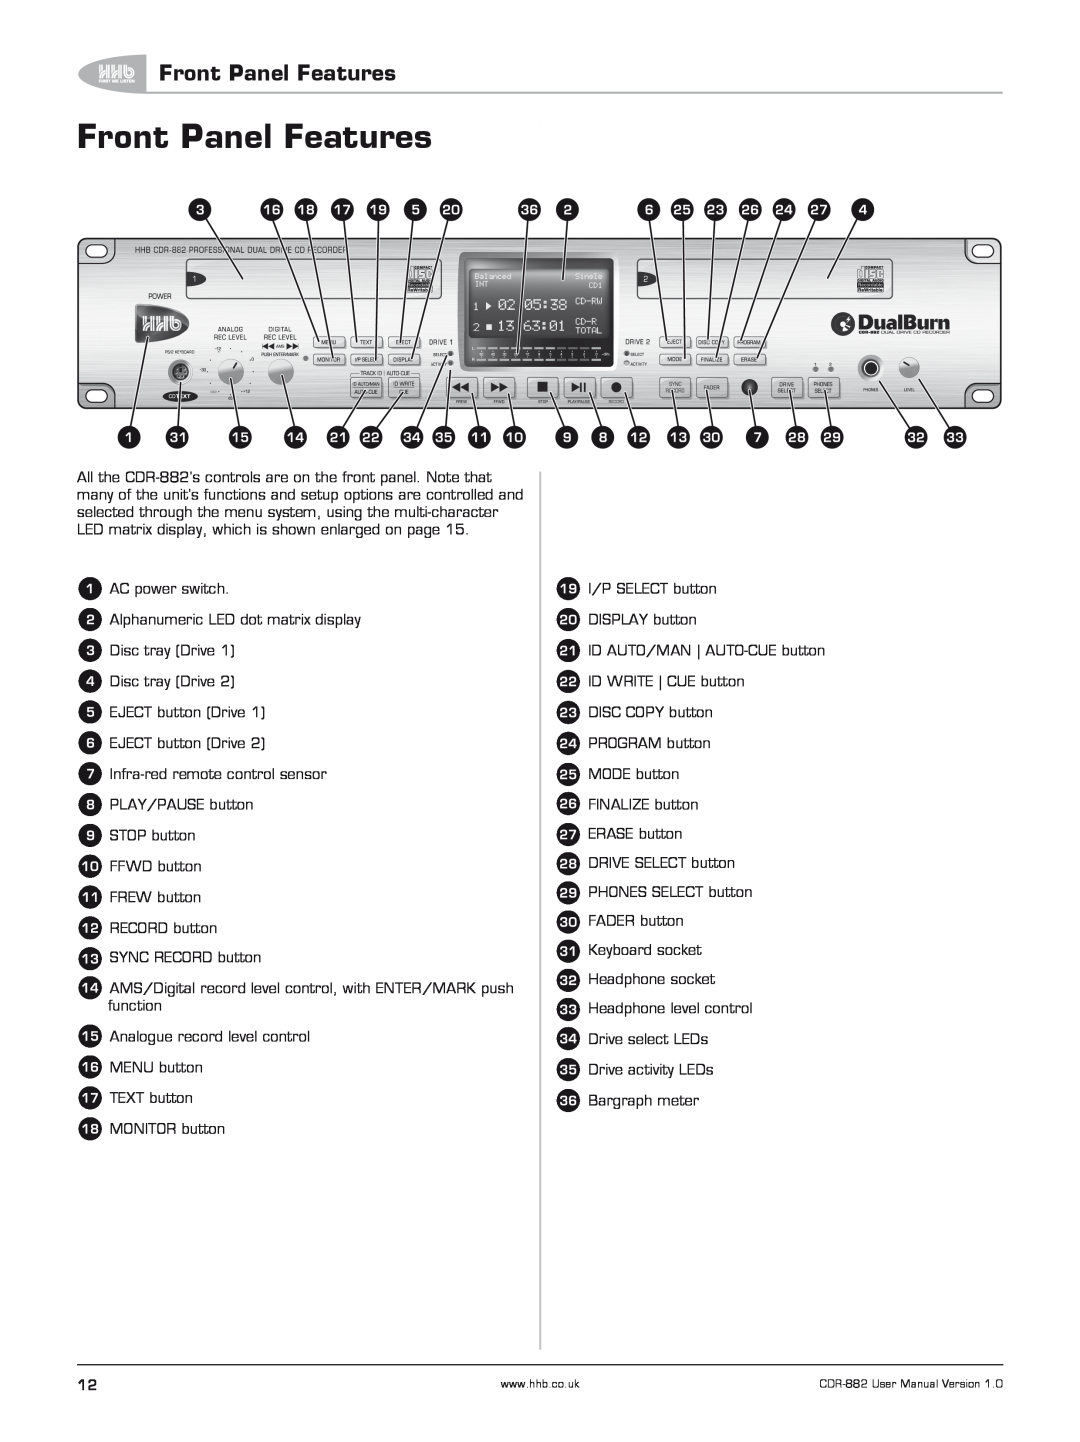 HHB comm CDR-882 user manual Front Panel Features 